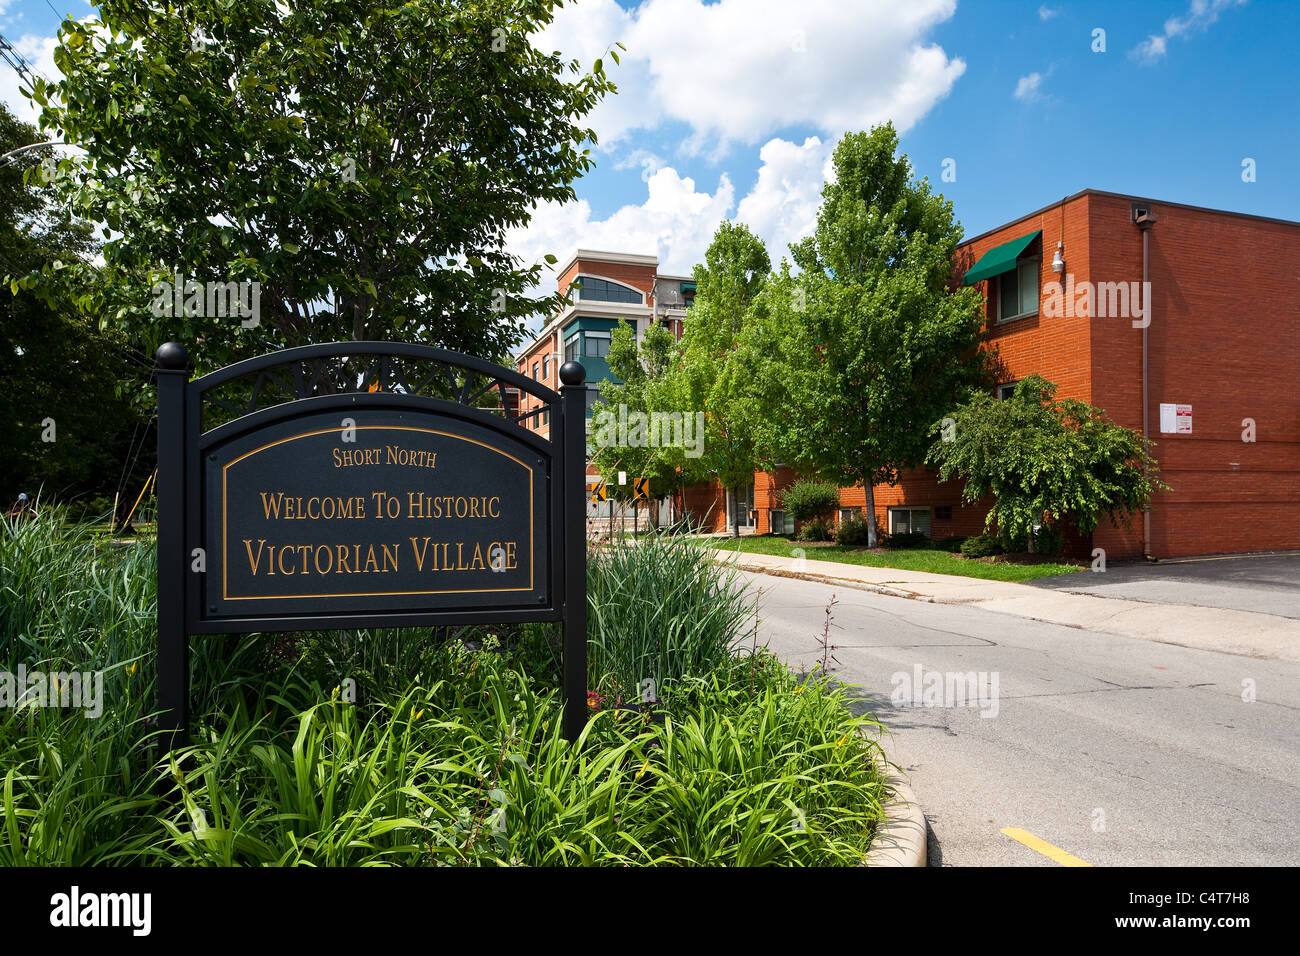 Victorian Village sign located in the Short North area of Columbus Ohio Stock Photo